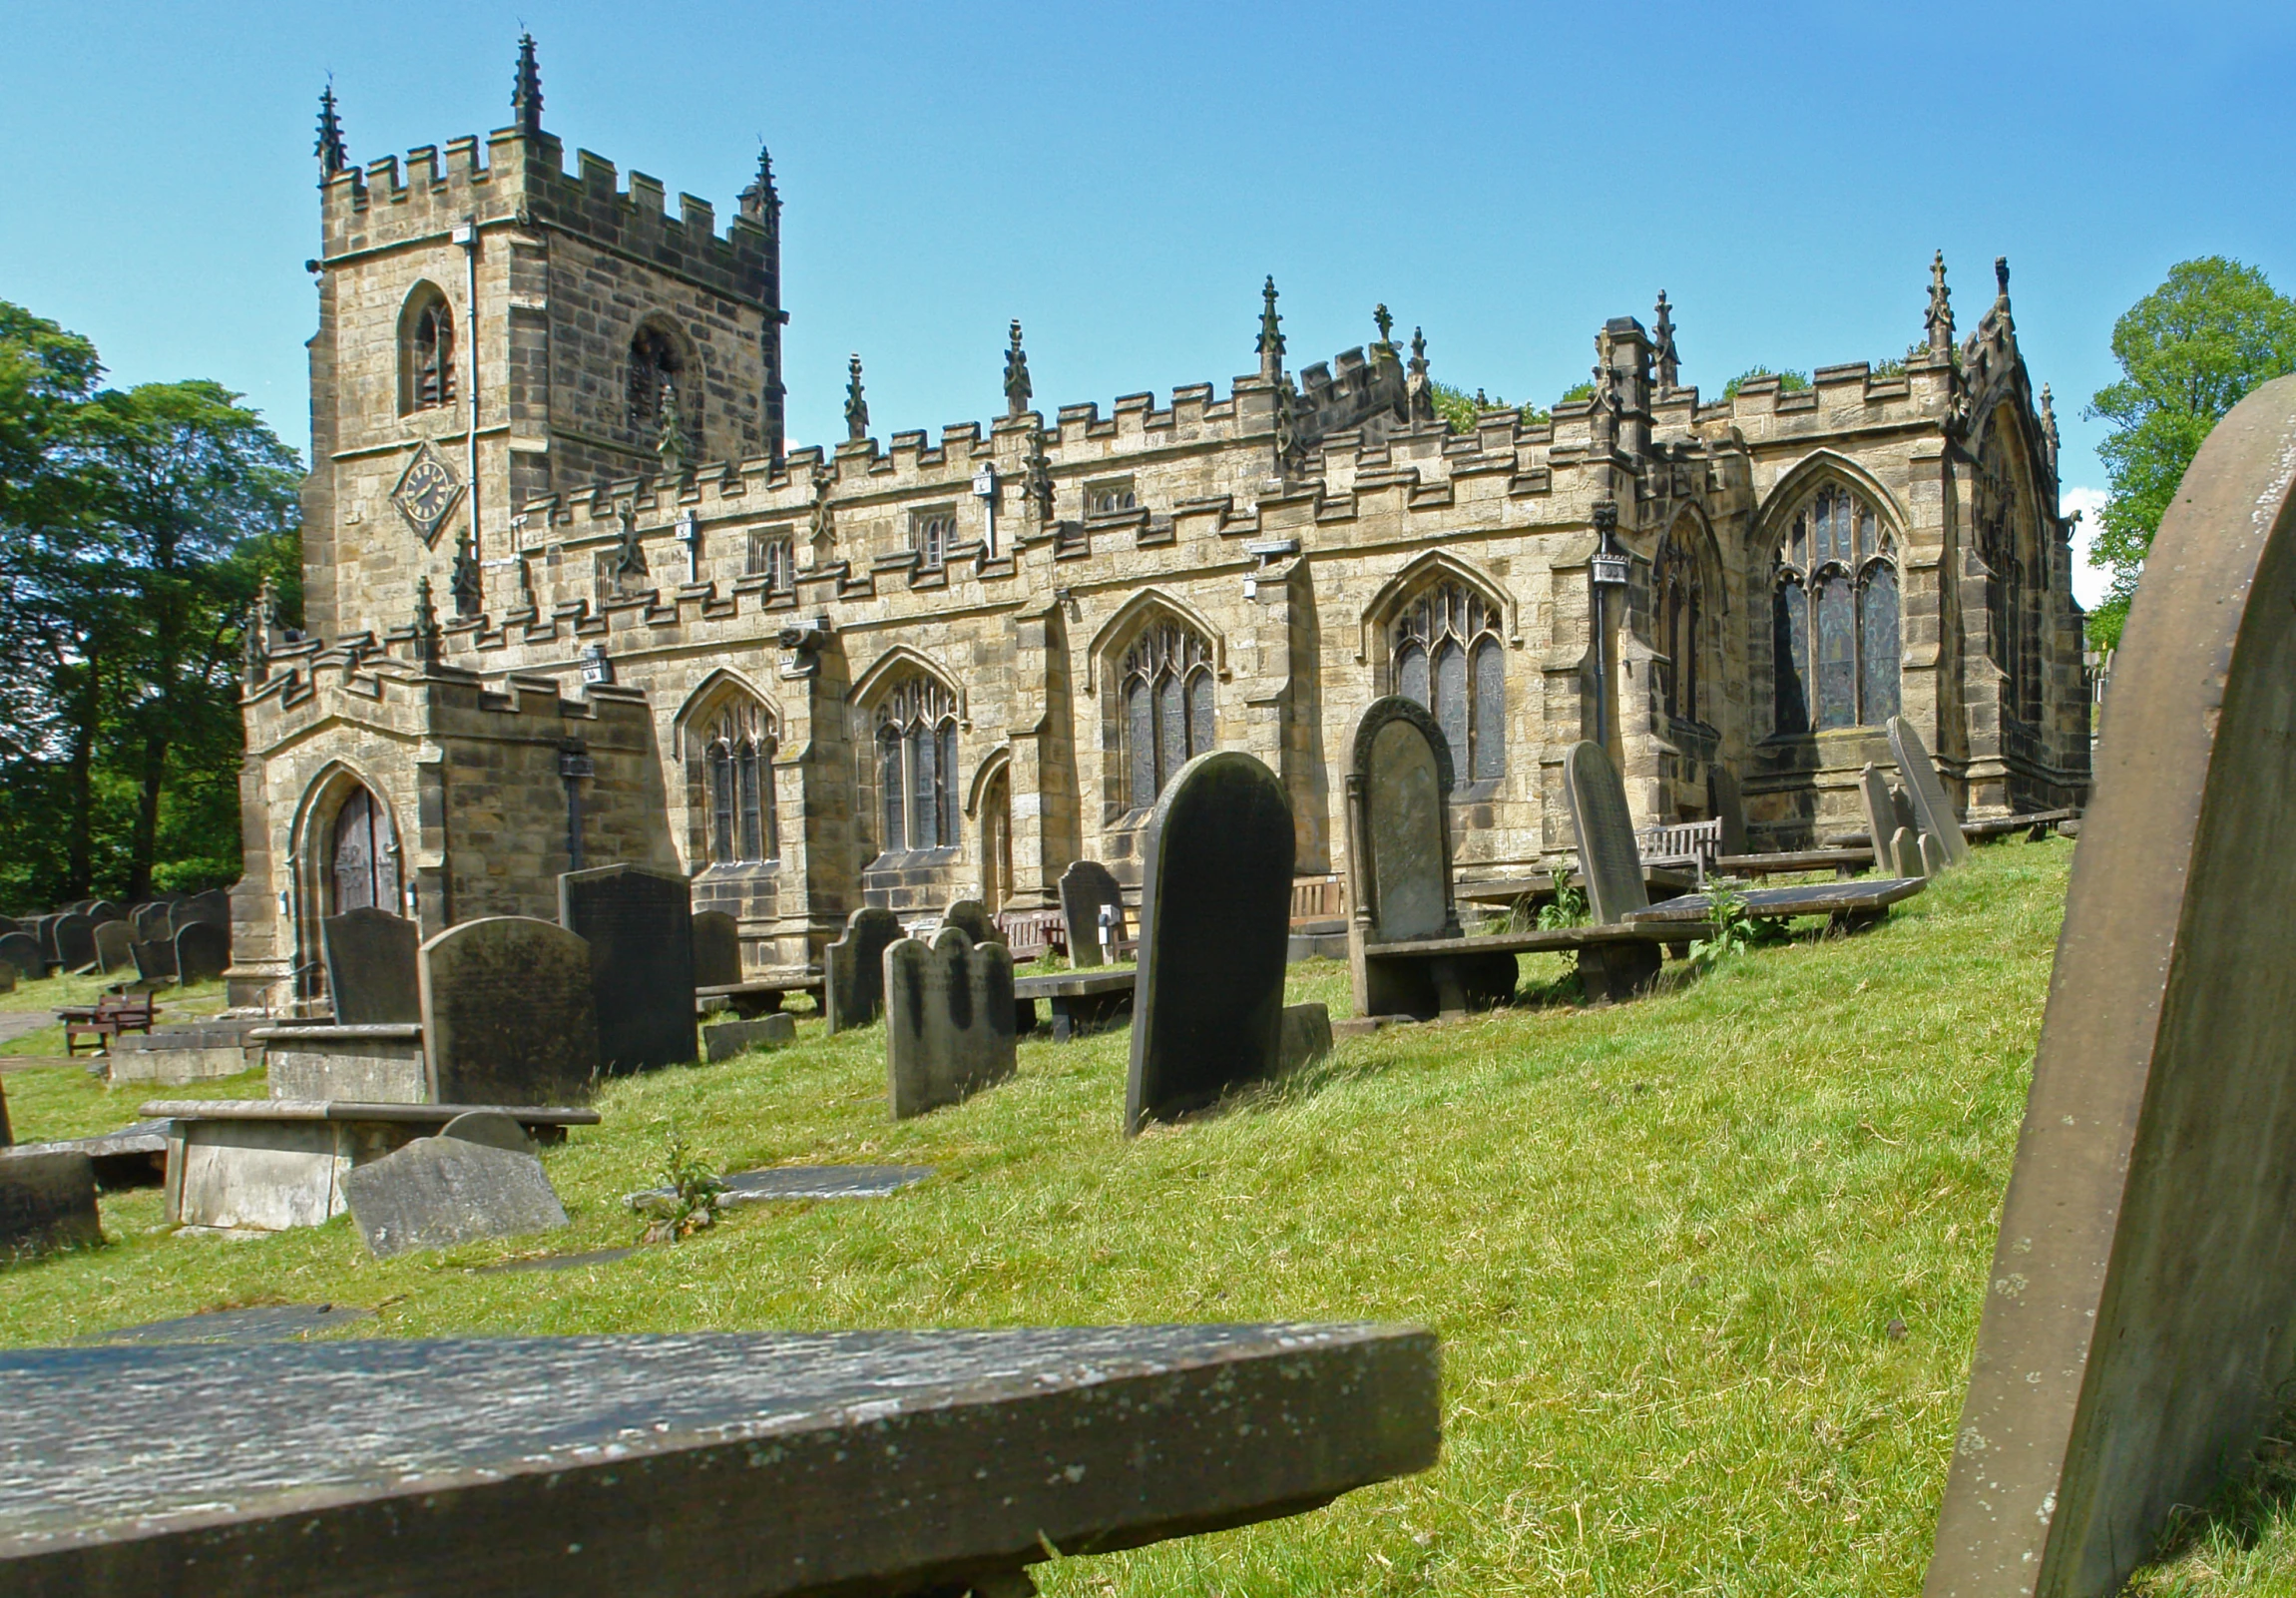 many headstones line the lawn in front of a tall, gothic era building